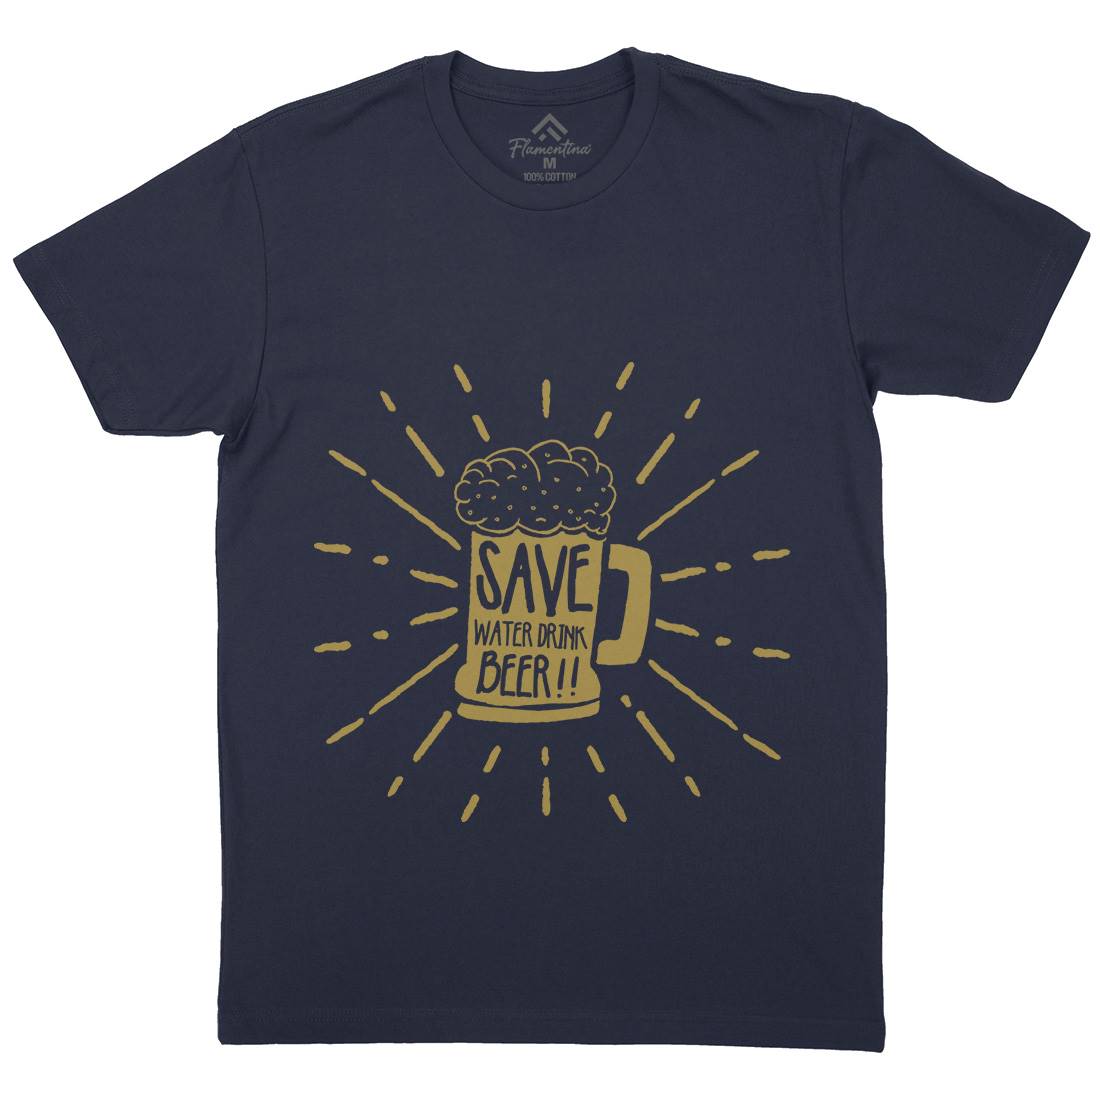 Save Water Mens Crew Neck T-Shirt Drinks A368